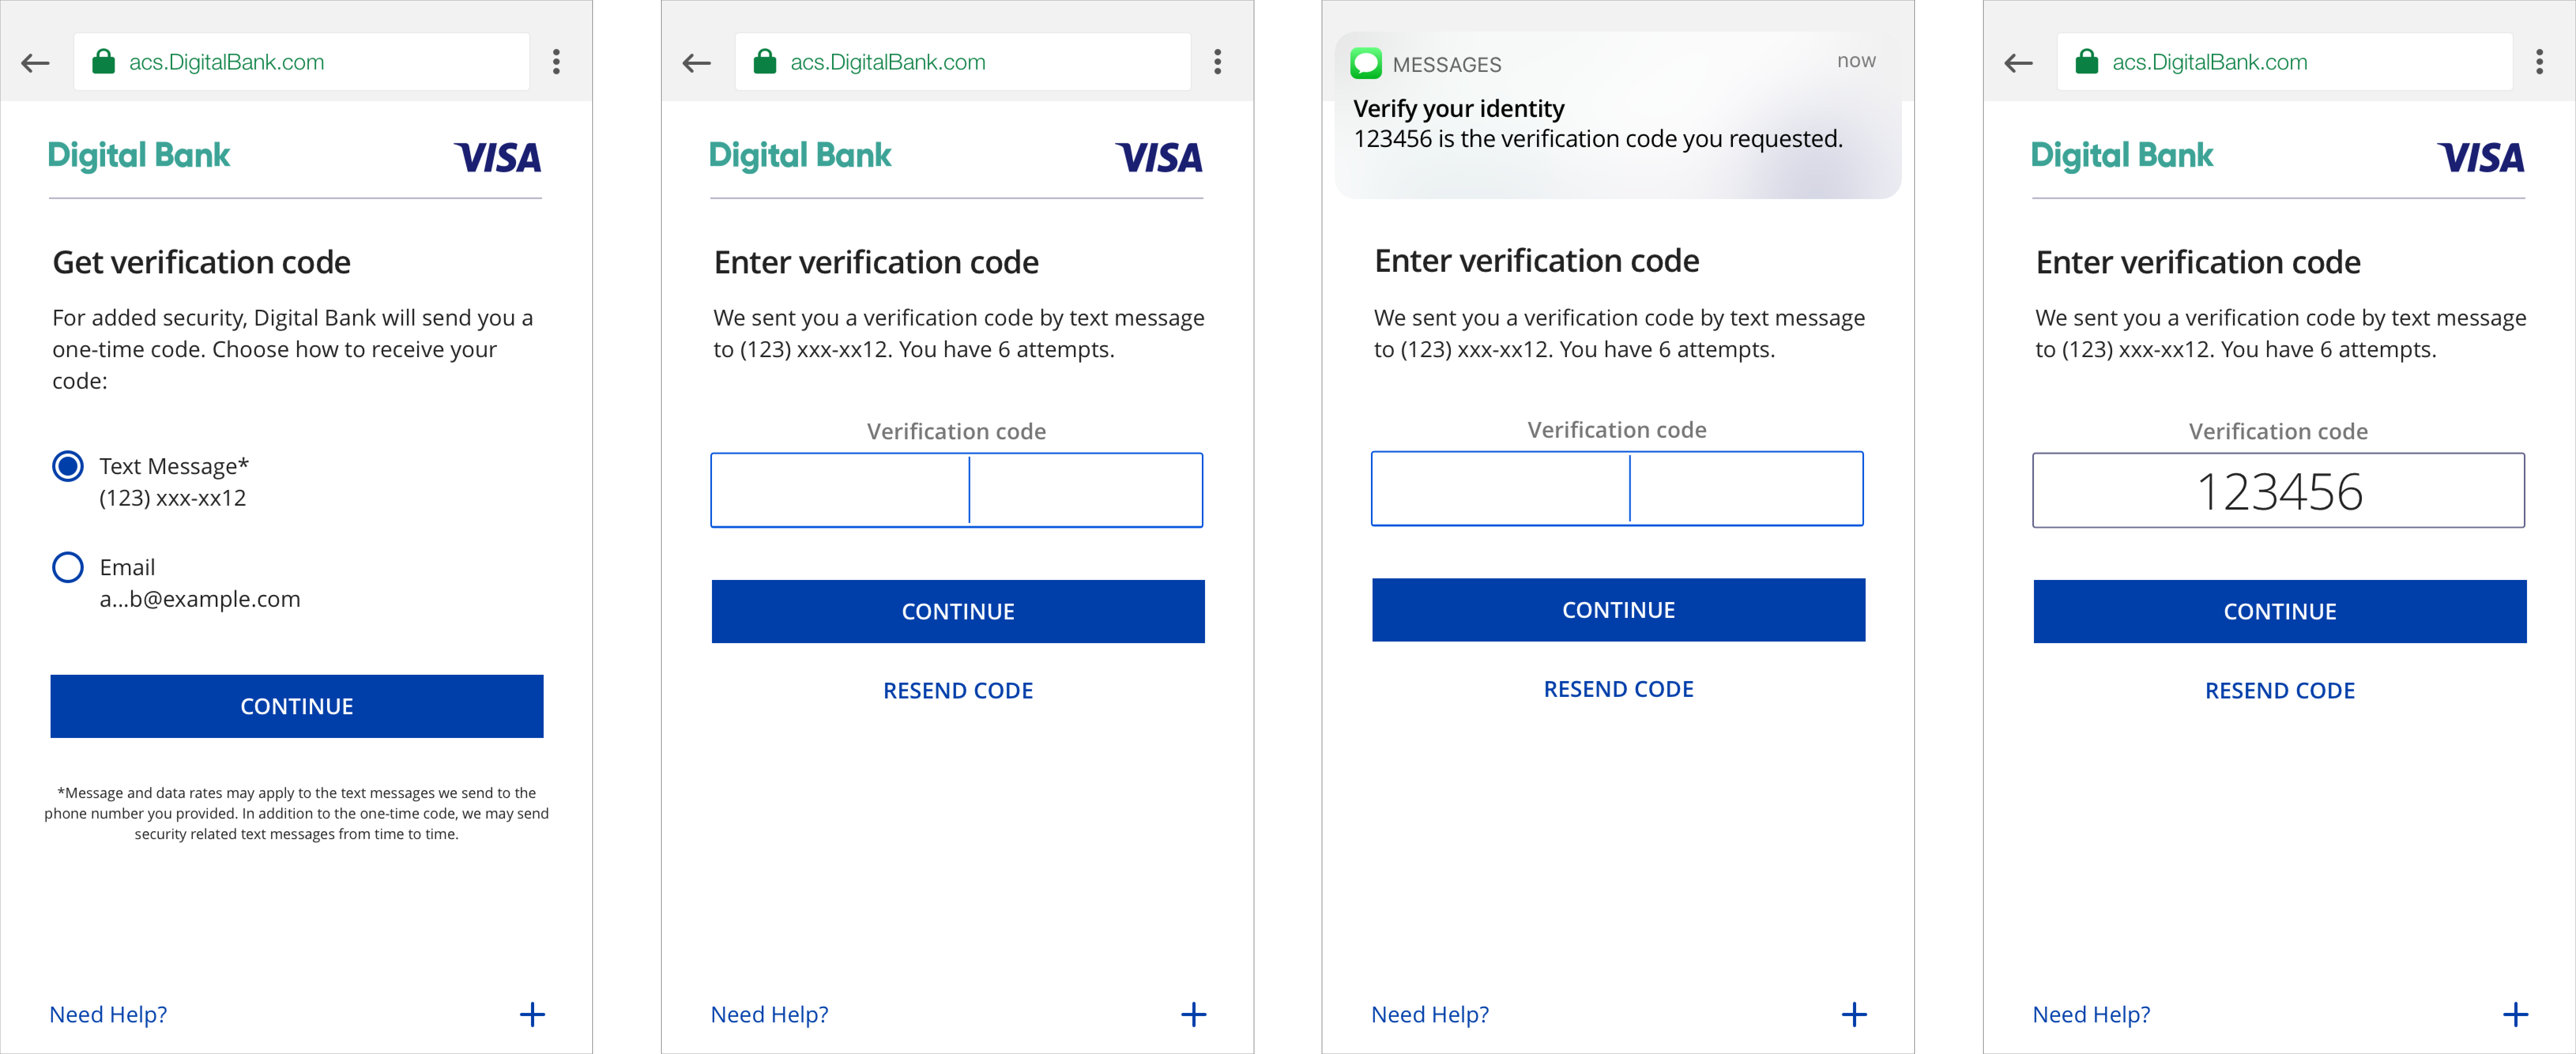 Receive and enter verification code flow for One-Time Passcode - mobile browser view